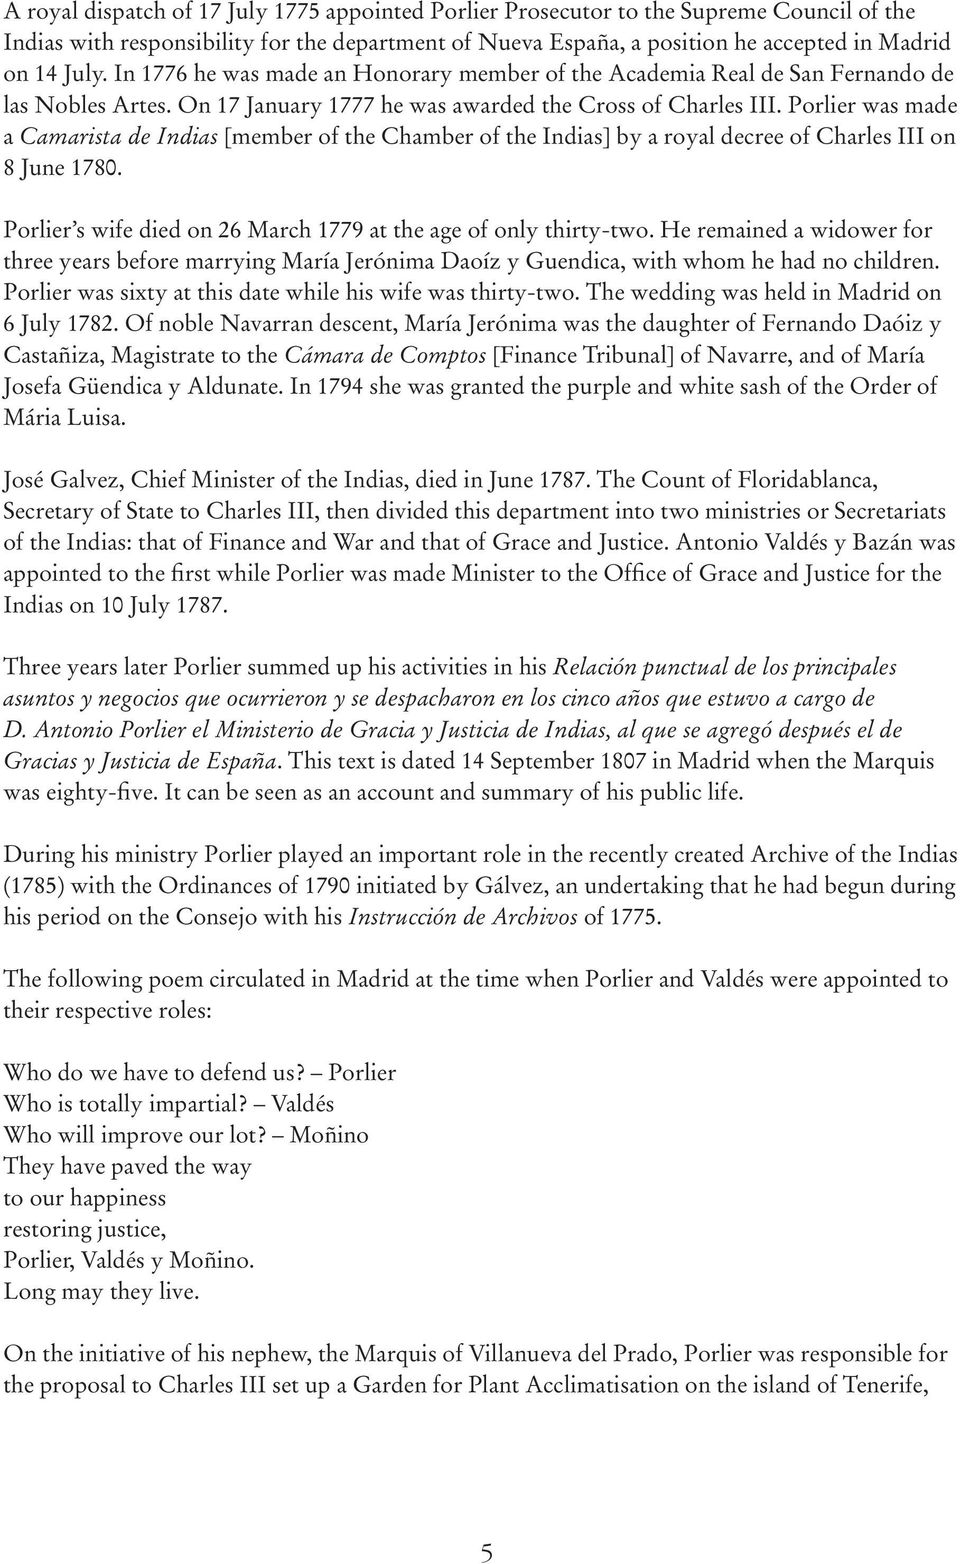 Porlier was made a Camarista de Indias [member of the Chamber of the Indias] by a royal decree of Charles III on 8 June 1780. Porlier s wife died on 26 March 1779 at the age of only thirty-two.